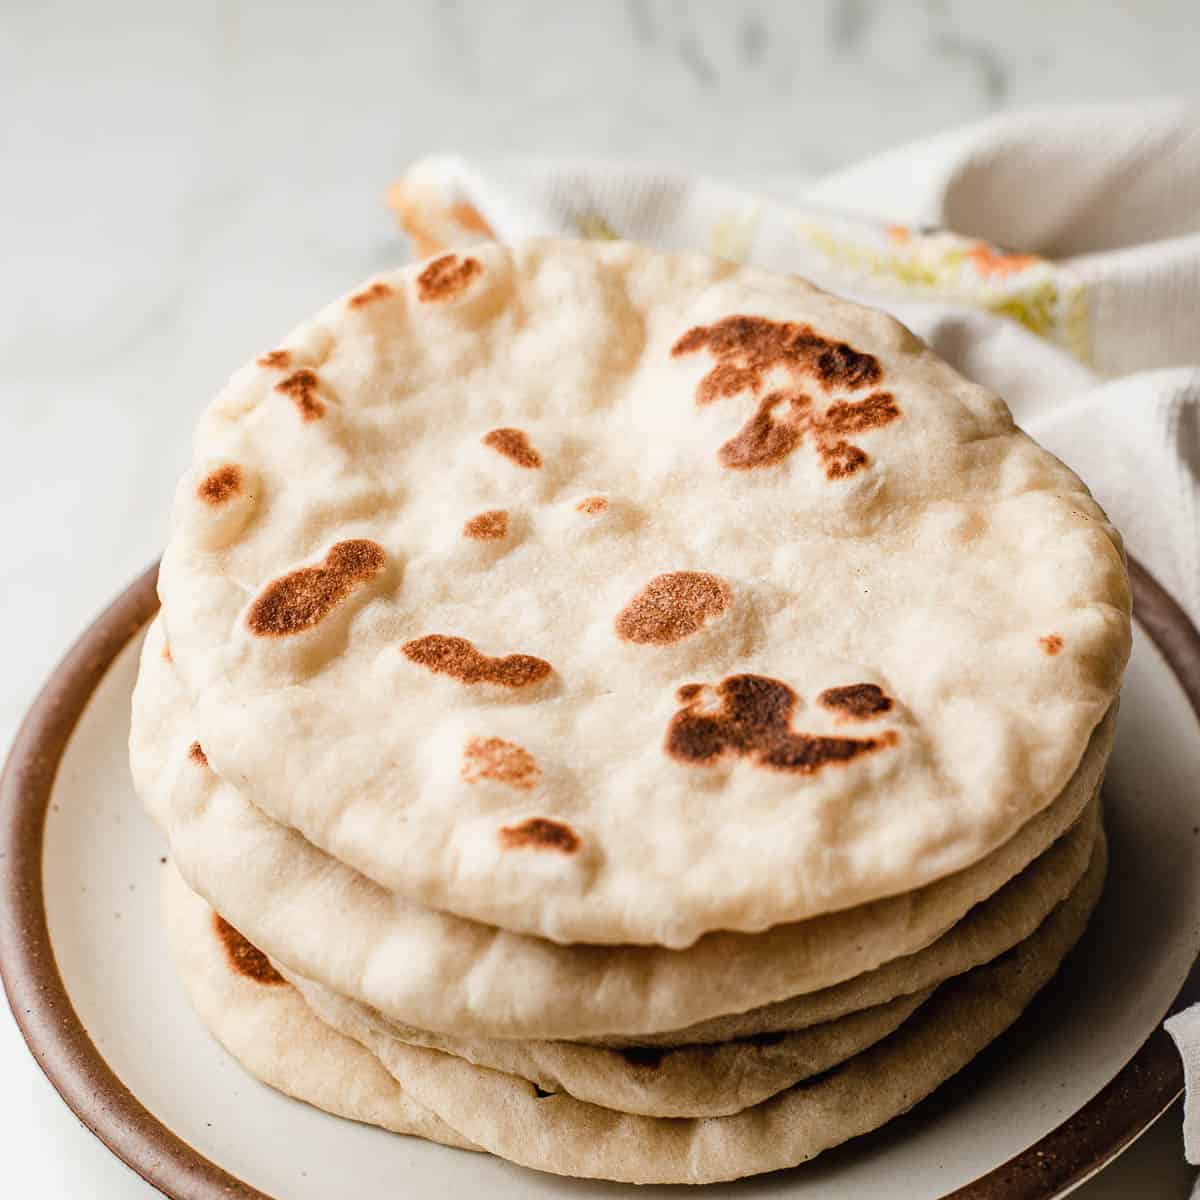 Sourdough naan stacked on a plate.